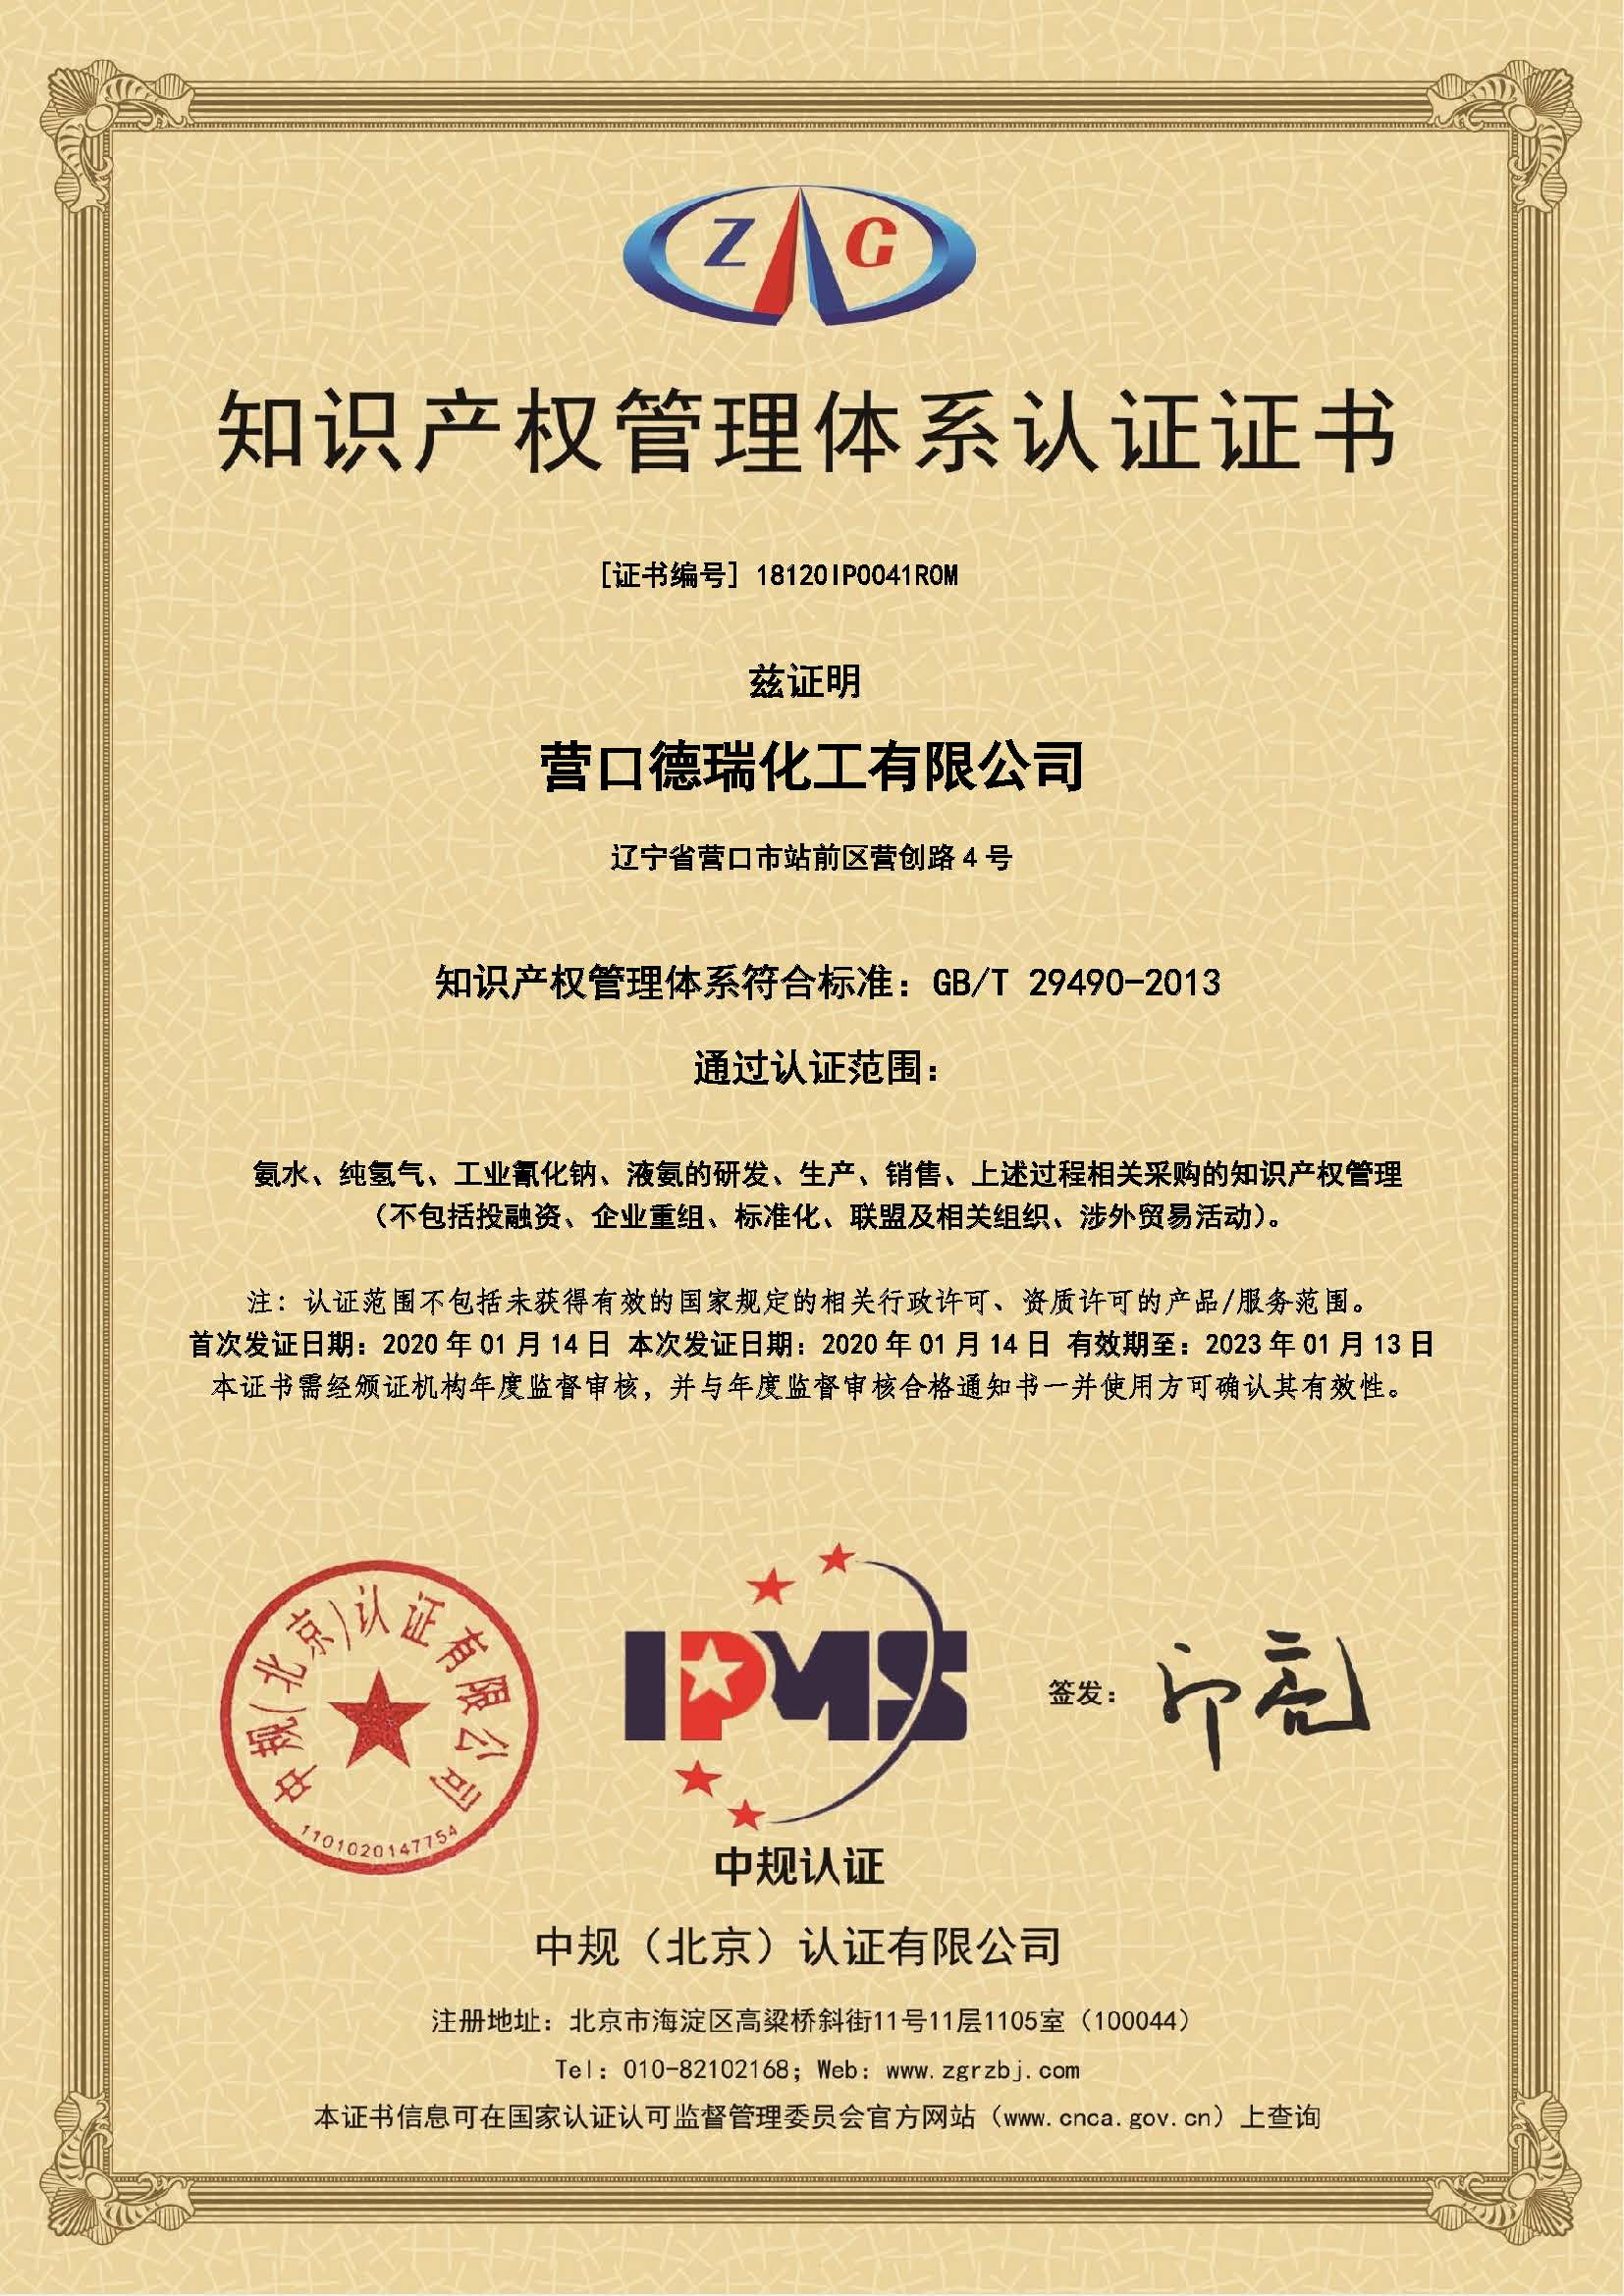 Derui Chemicals successfully passed the intellectual property management system certification